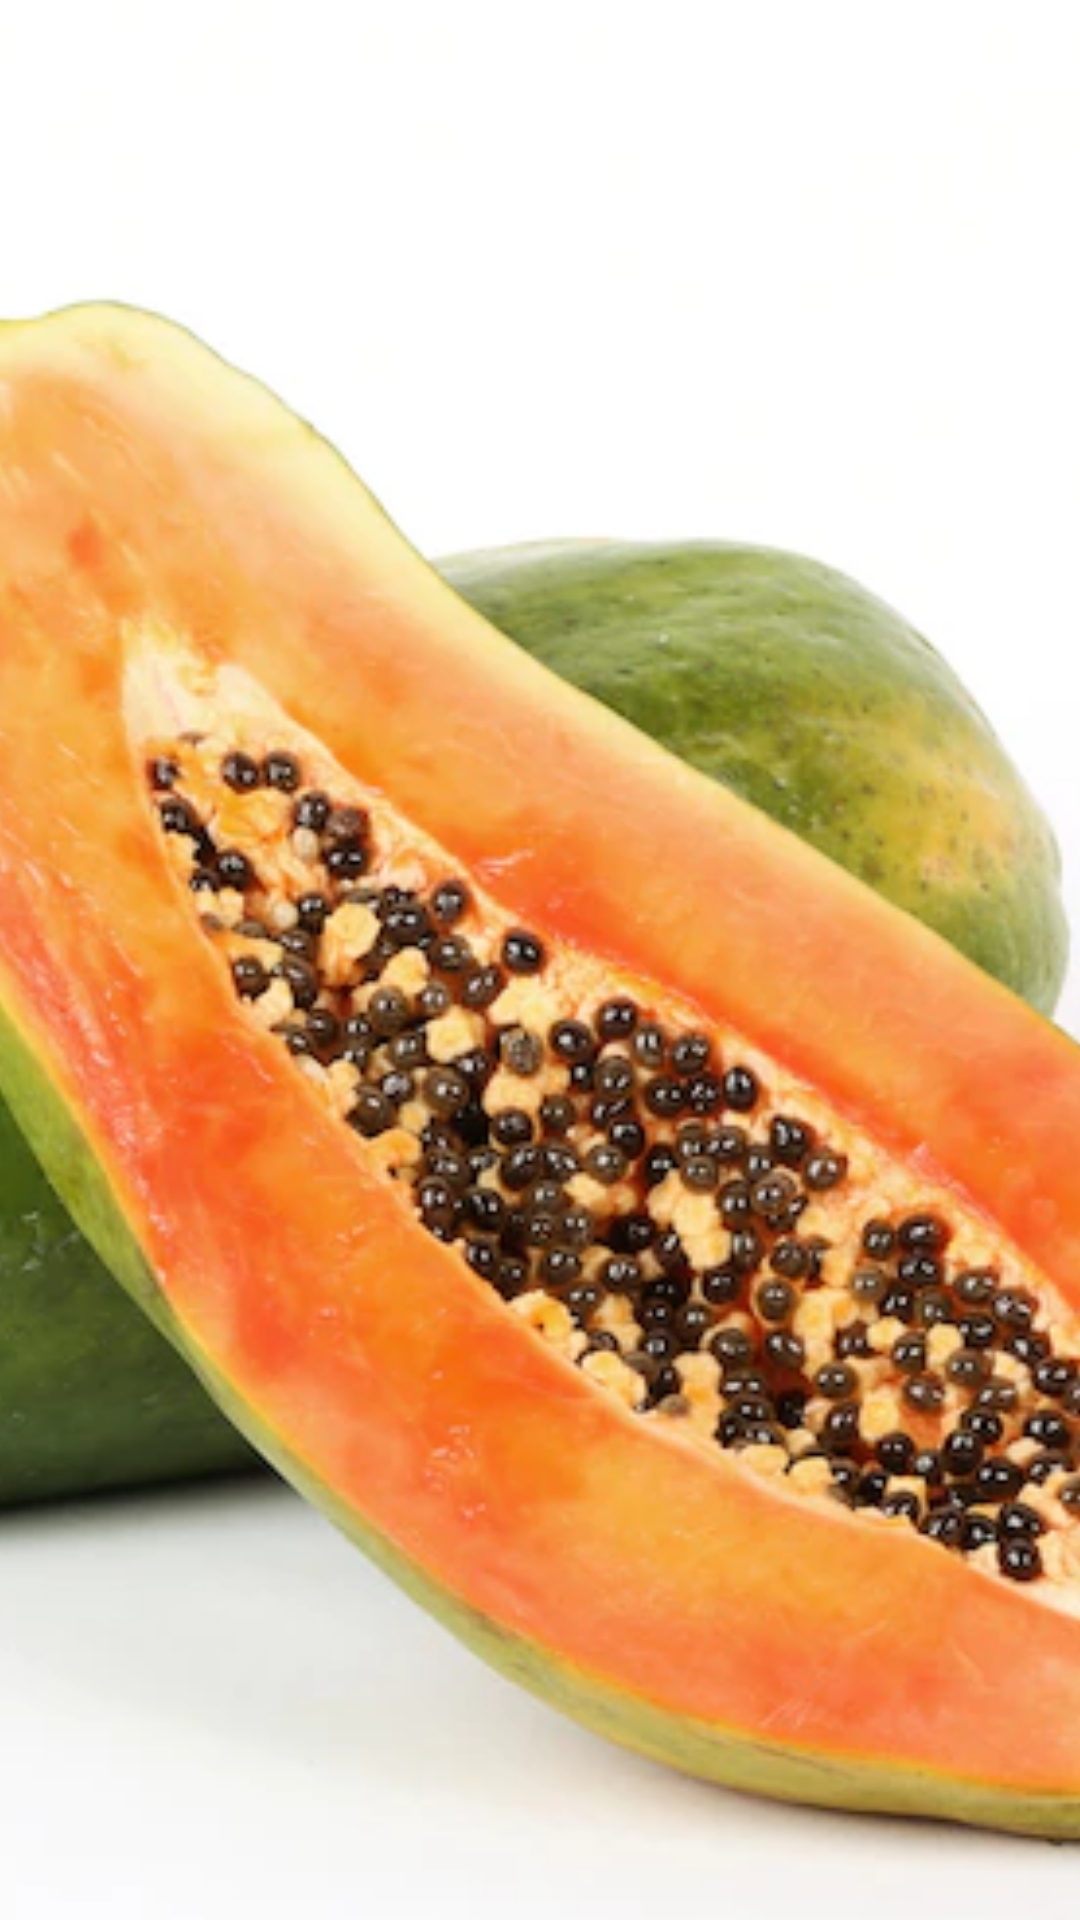 Anti-cancer properties to looking young, 5 health benefits of papaya